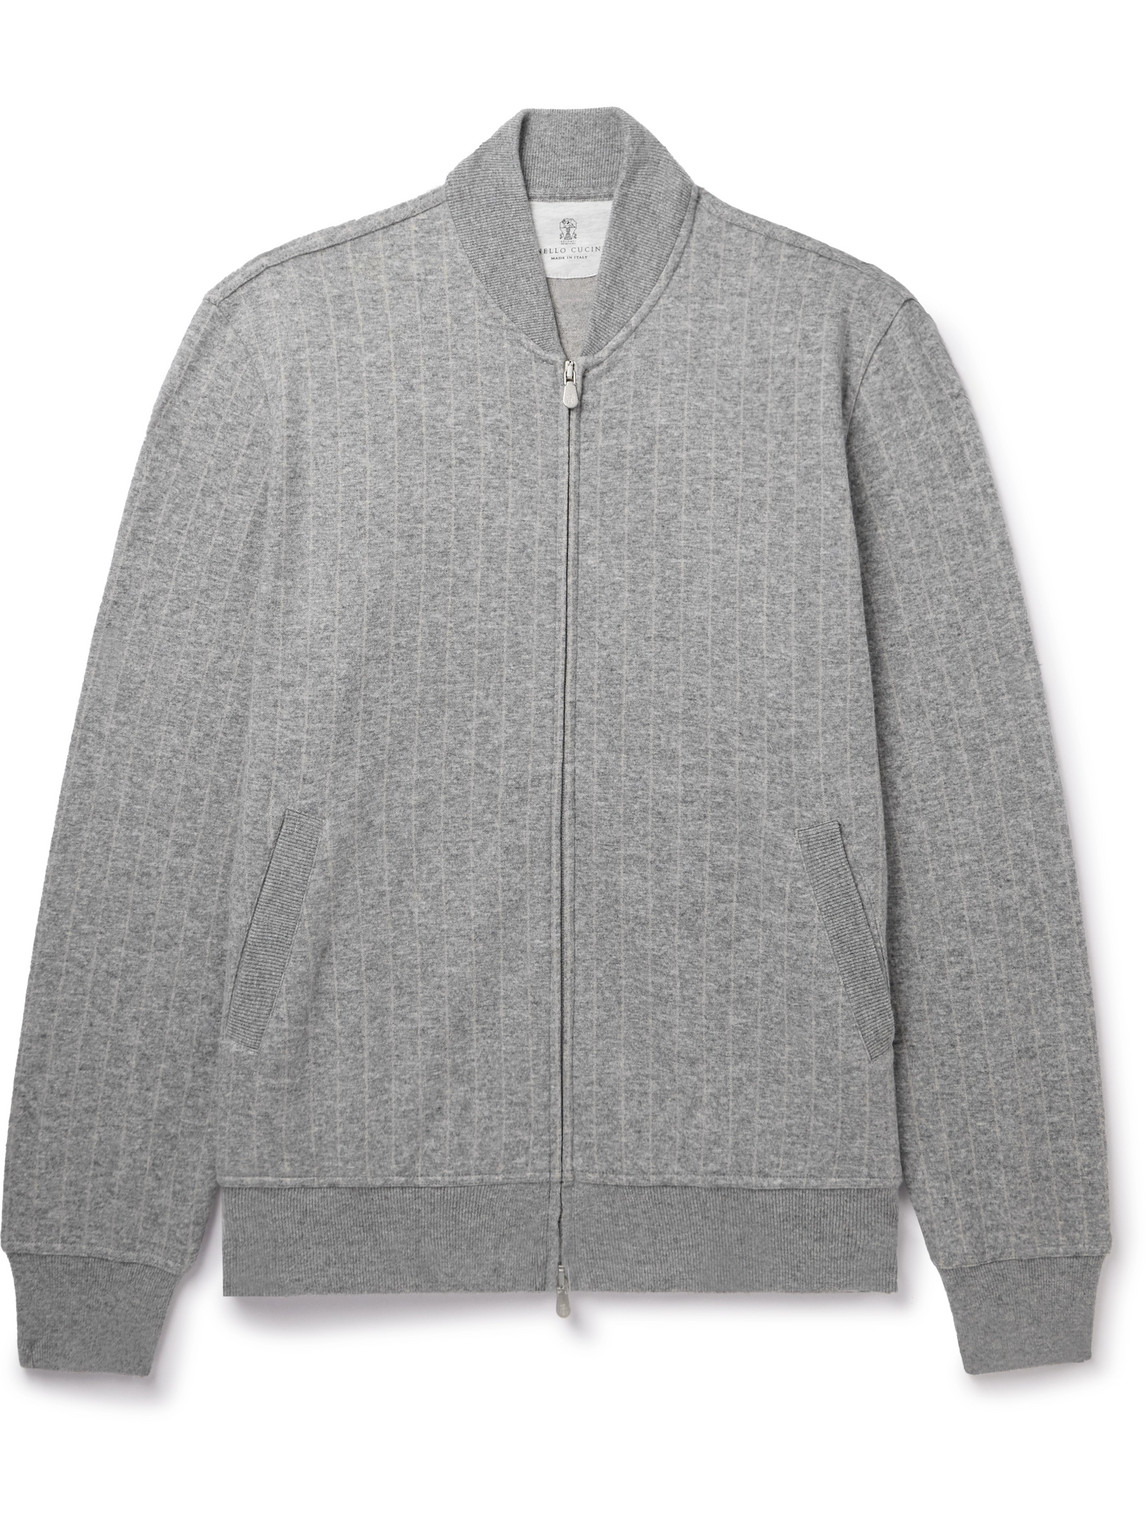 Pinstriped Cashmere and Cotton-Blend Bomber Jacket